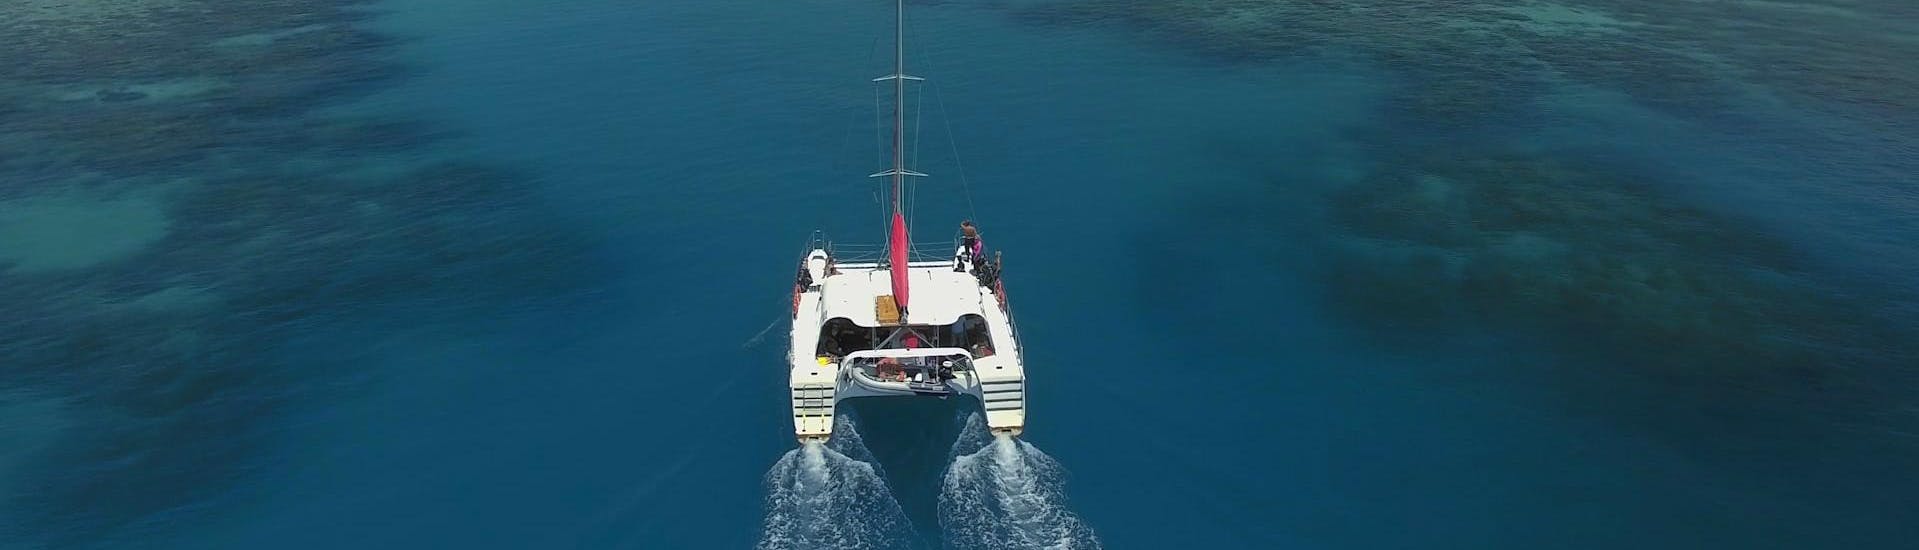 The catamaran Reef Daytripper Cairns is heading towards Upolu Reef for a diving and snorkeling excursion in the Outer Great Barrier Reef.